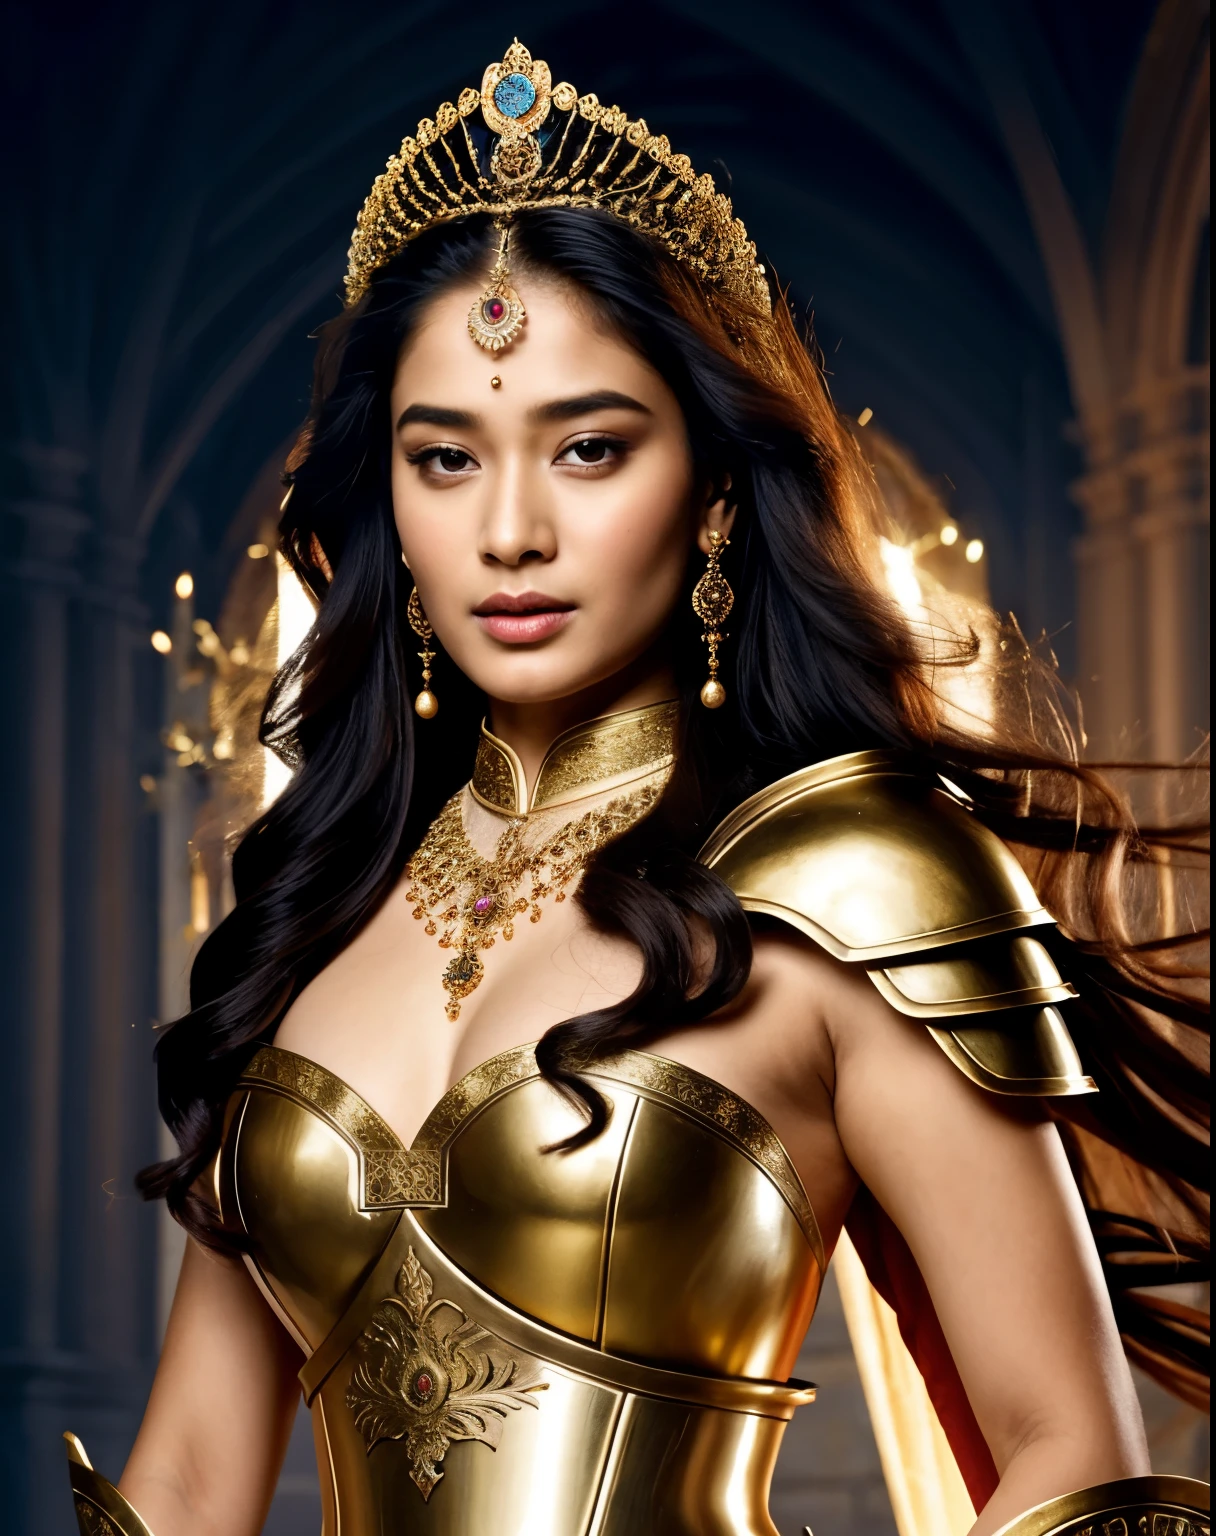 Looks like Amrita Rao, "Design an illustration of a stunning and powerful warrior queen with a regal presence. She should possess a combination of strength and grace. Imagine her in ornate, yet practical armor that complements her figure. The armor should be adorned with intricate details and symbols representing her royal lineage and warrior prowess. Her weapon of choice could be a unique and elegant sword or a mythical weapon that reflects her status as a formidable leader.

Her facial features should exude confidence and determination, with piercing eyes that convey both fierceness and wisdom. The queen's hair, whether long or short, should flow dynamically, hinting at her movement in battle. Consider incorporating elements that emphasize her connection to nature or a mythical realm, such as ethereal backgrounds, symbolic animals, or mystical symbols.

Pay attention to the color palette; use rich, bold colors that enhance her royal aura. Experiment with lighting to highlight specific details and create a sense of drama. Ensure that her posture and expression capture the essence of a queen who commands respect and admiration. Feel free to draw inspiration from historical warrior queens or fictional characters, blending elements to create a unique and captivating image."